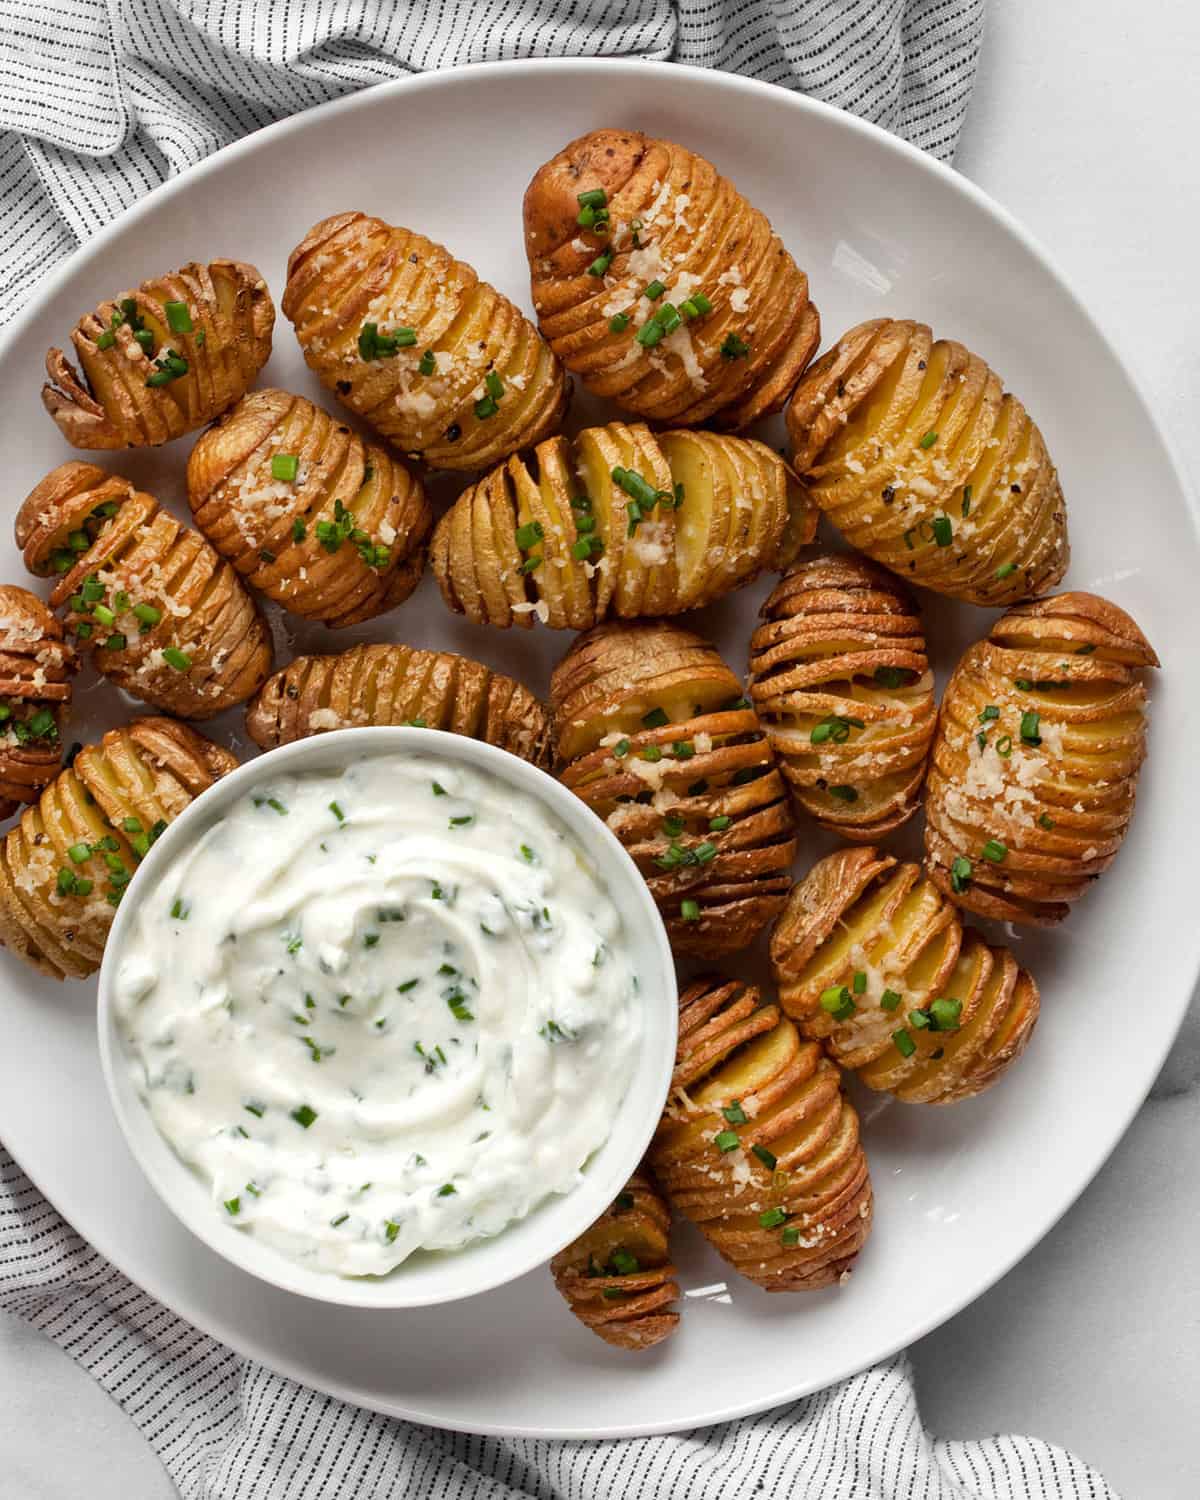 Mini hasselback potatoes on a plate with herby yogurt dip in a small bowl.